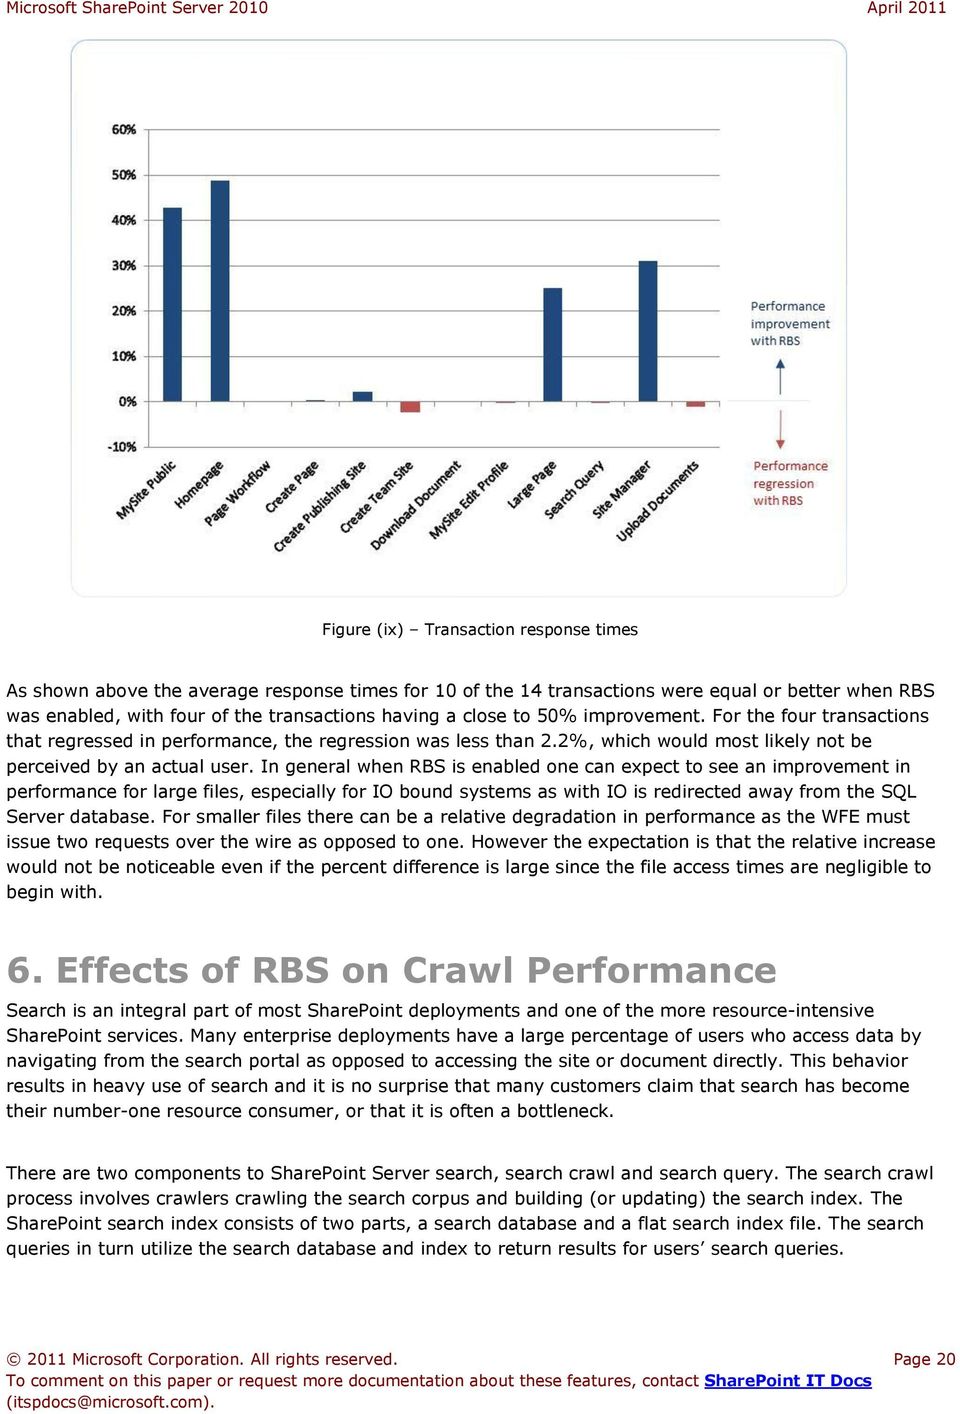 In general when RBS is enabled one can expect to see an improvement in performance for large files, especially for IO bound systems as with IO is redirected away from the SQL Server database.